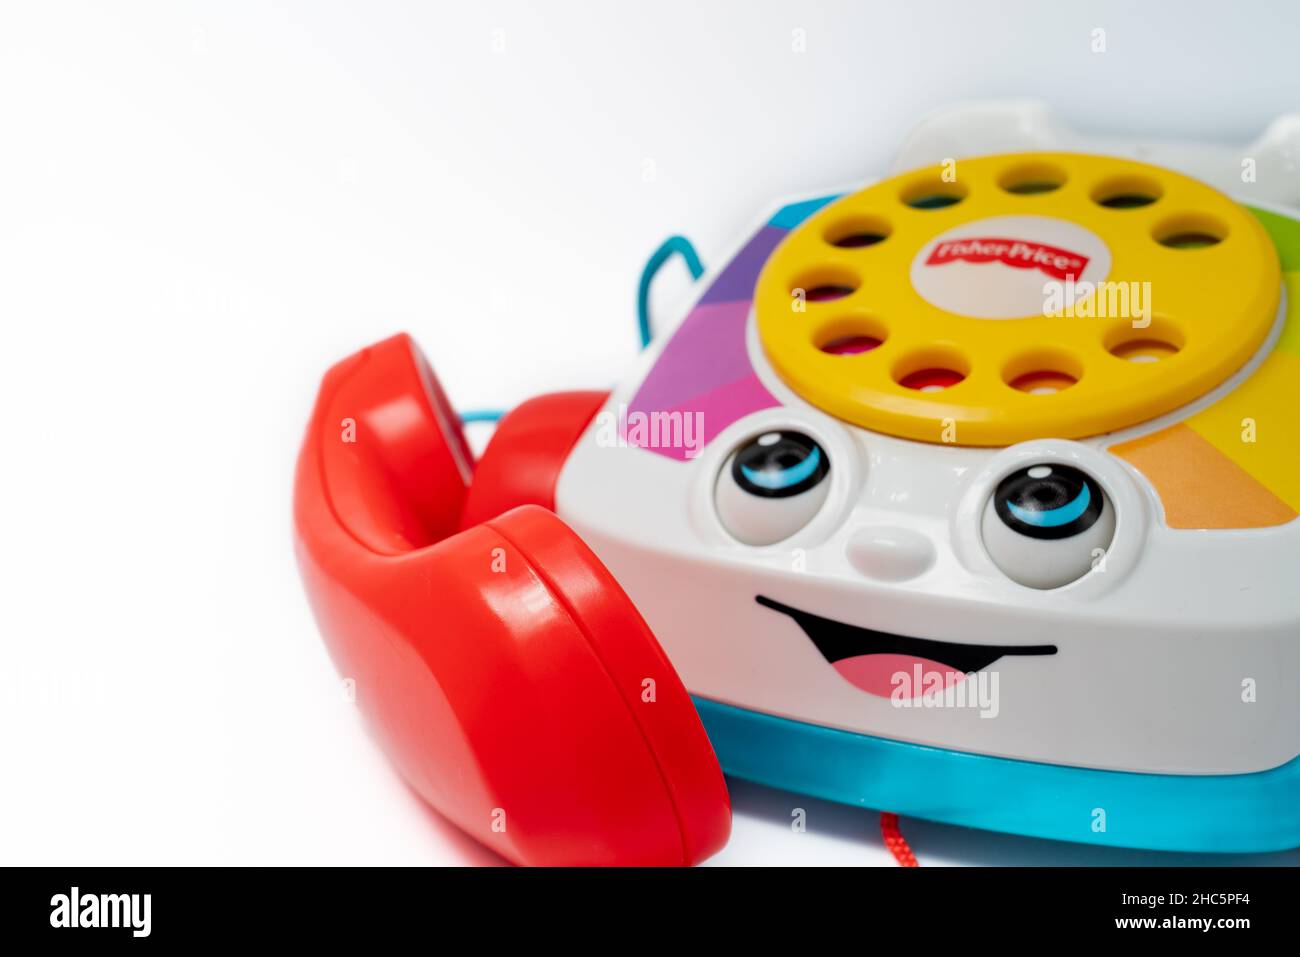 Barcelona, Spain - 12.24.2021: Children's toy landline phone with a red receiver, a dial and a smile on the body made by Fisher-Price isolated on whit Stock Photo